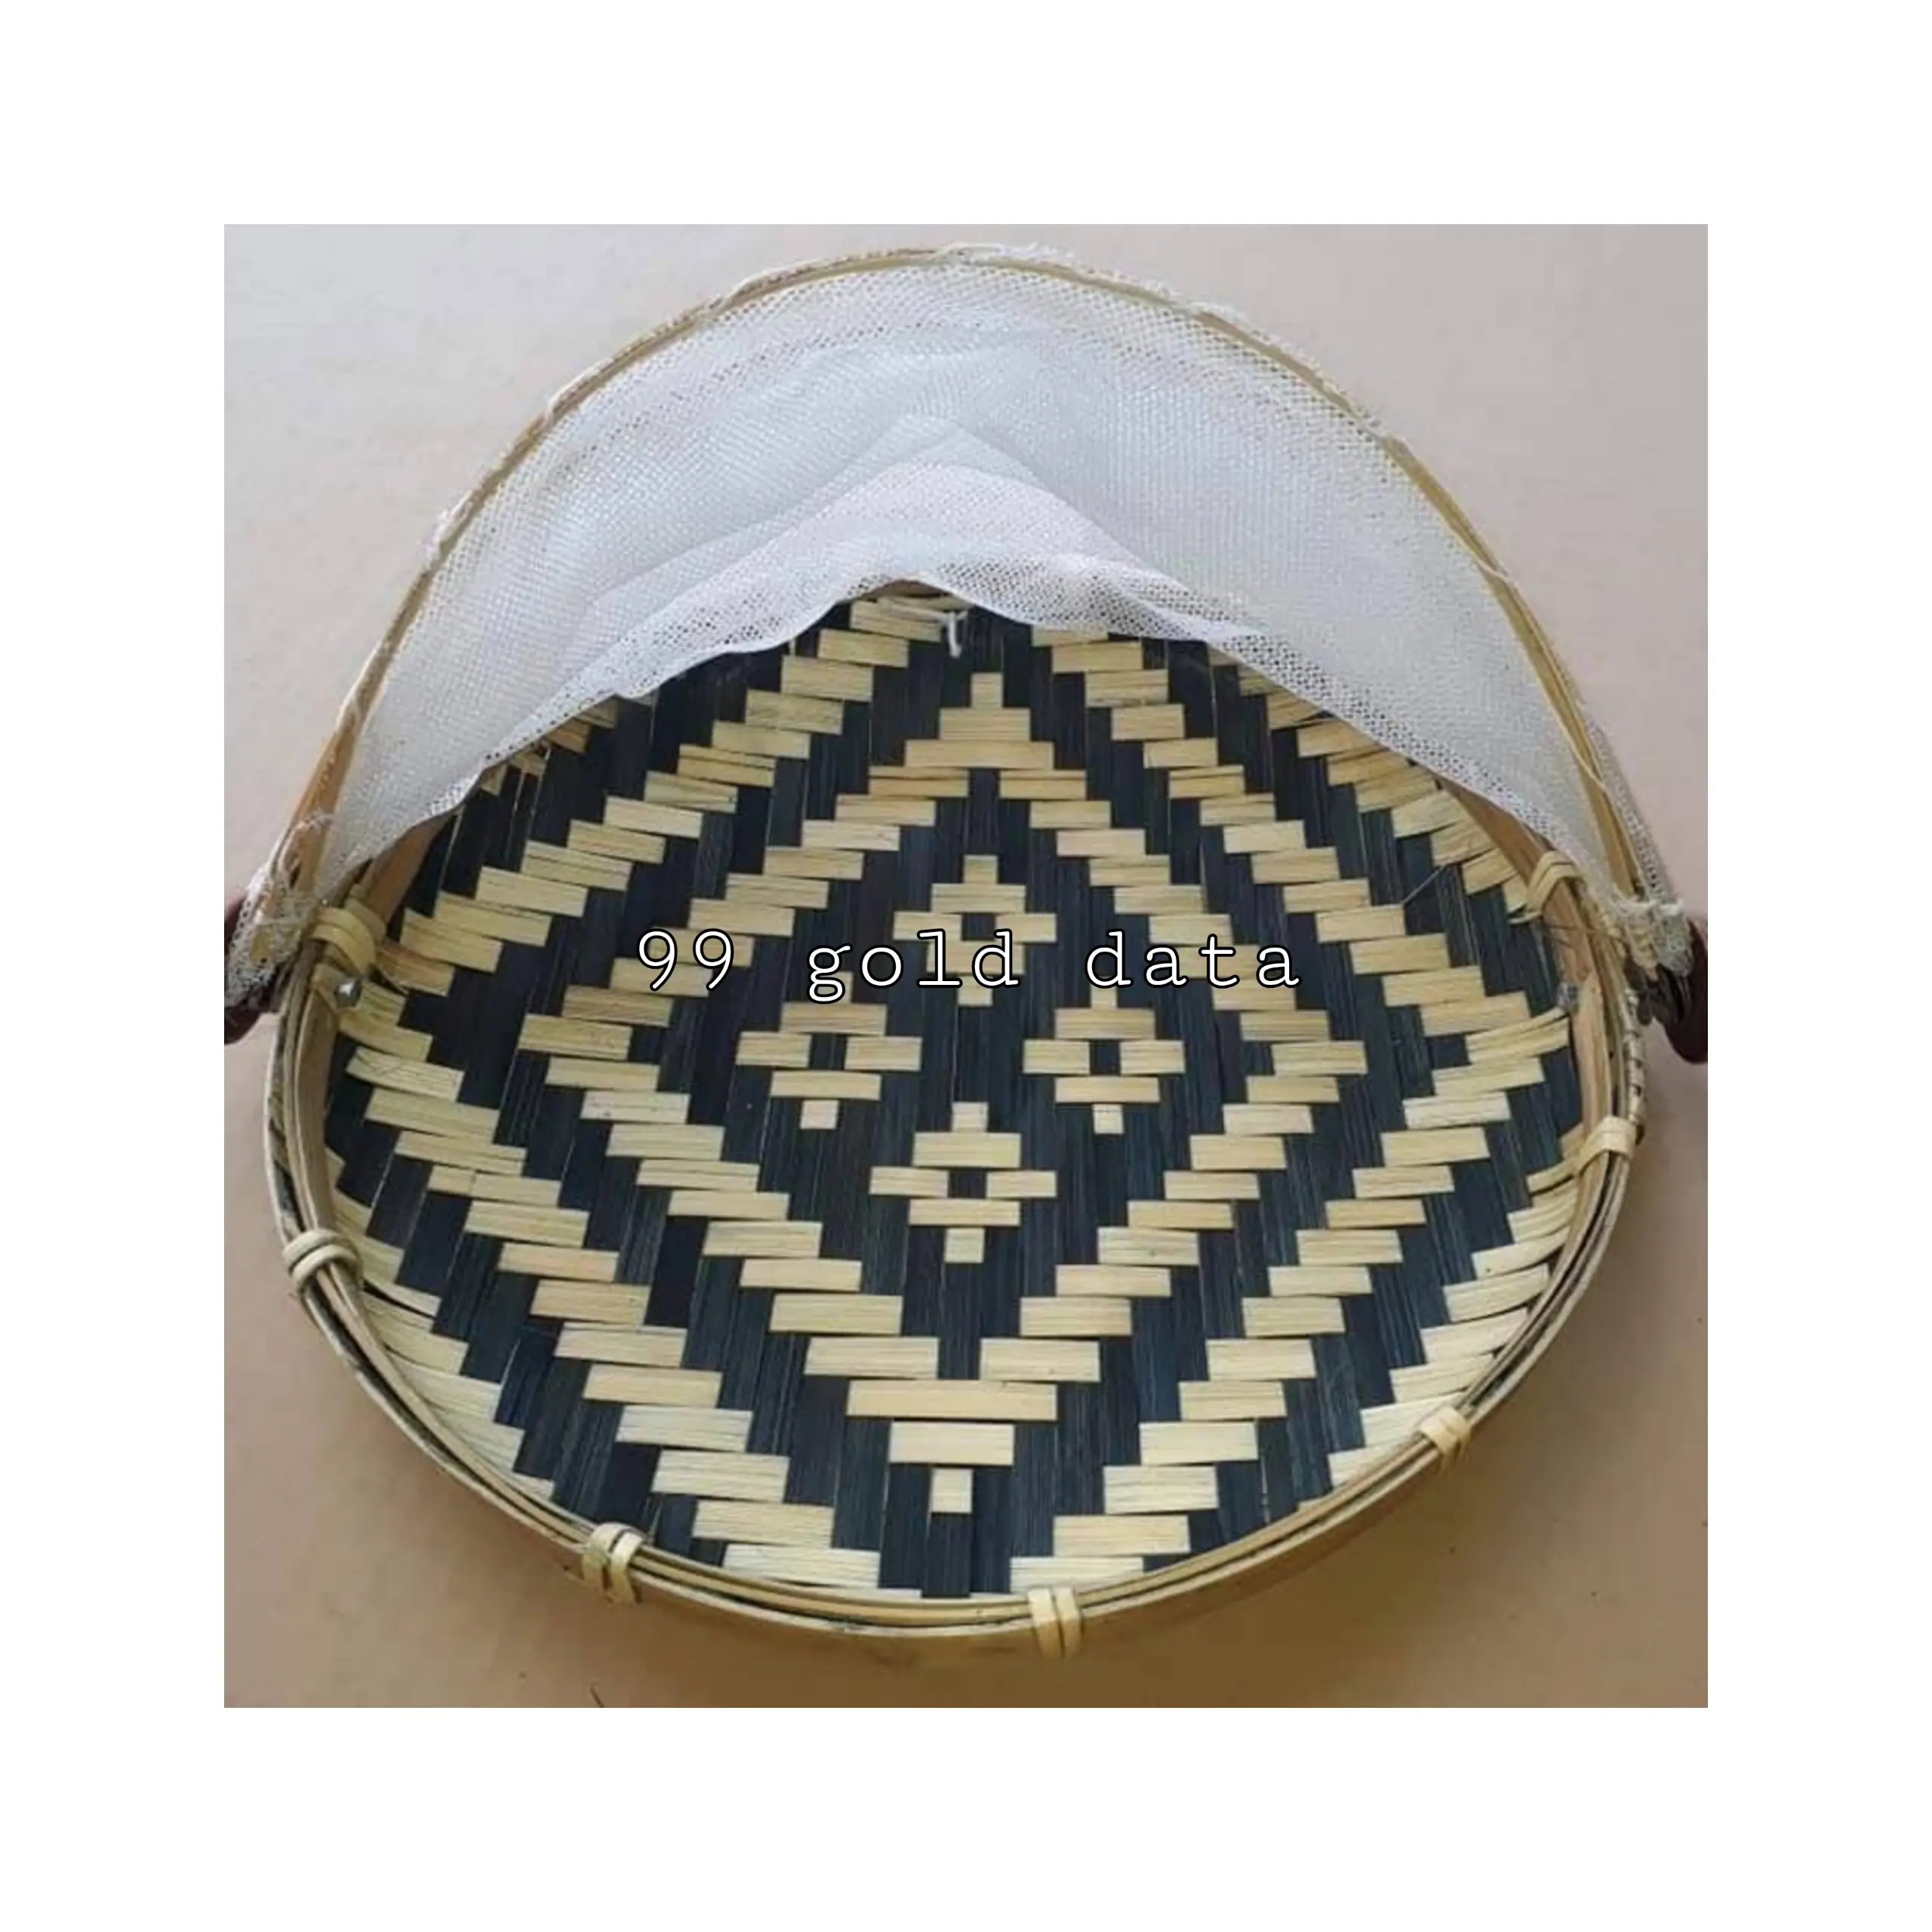 Wholesale round flat winnowing bamboo basket is of great use to your customers eco-friendly product 99 Gold Data